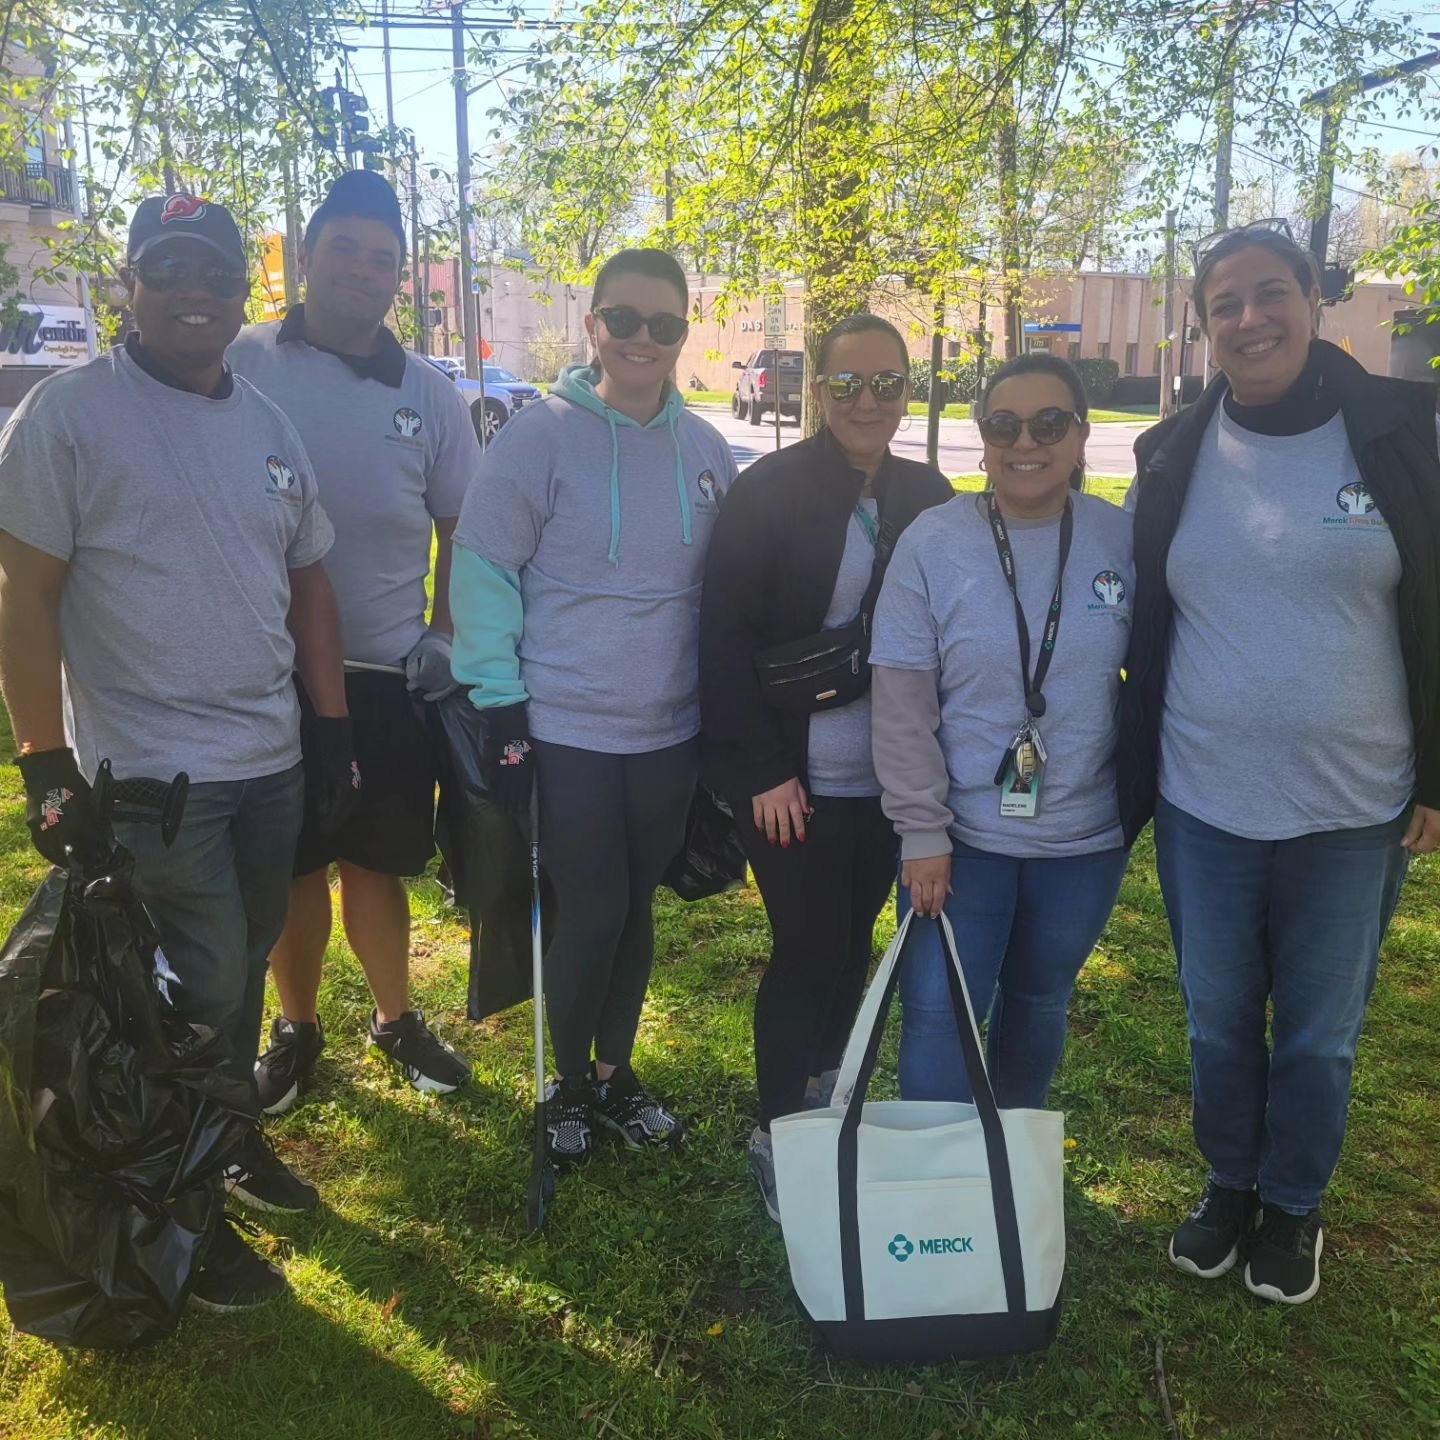 🌿🌍 A huge shoutout to the amazing team from Merck Pharmaceutical, who joined us today for a fantastic clean-up effort at Wheatena Park in Rahway! 🌟

They walked along the banks of the Rahway River, diligently collecting tons of plastic bottles, gl